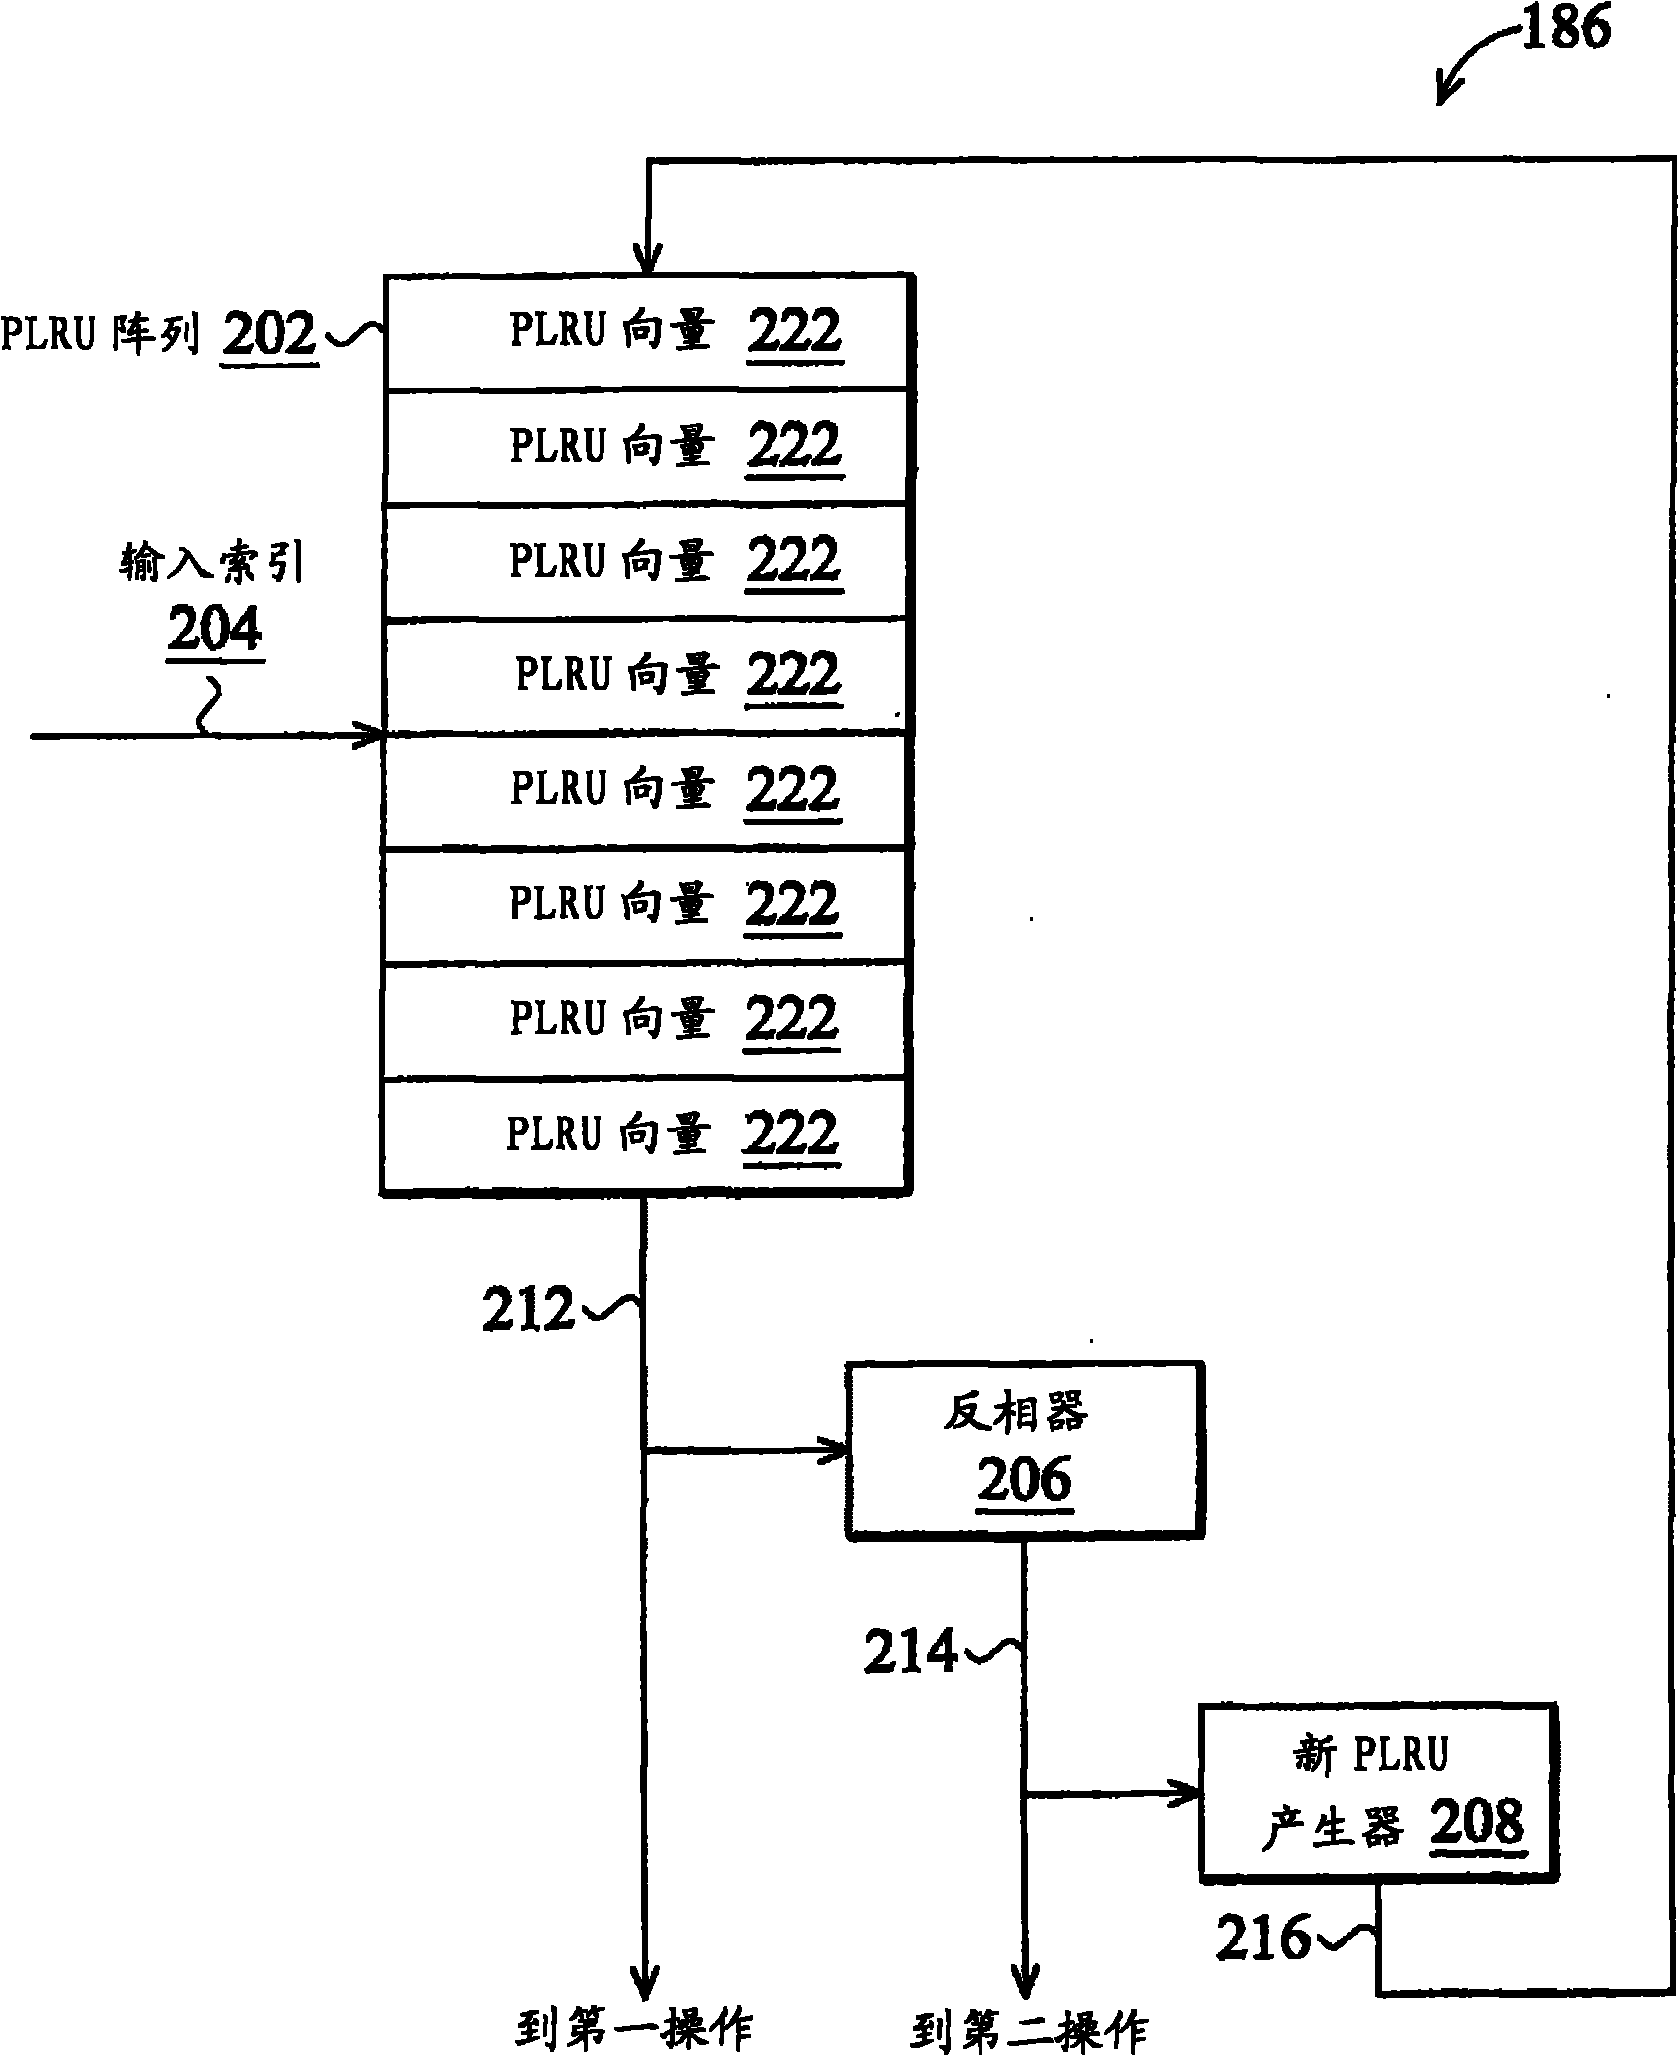 Memory configuration apparatus and method